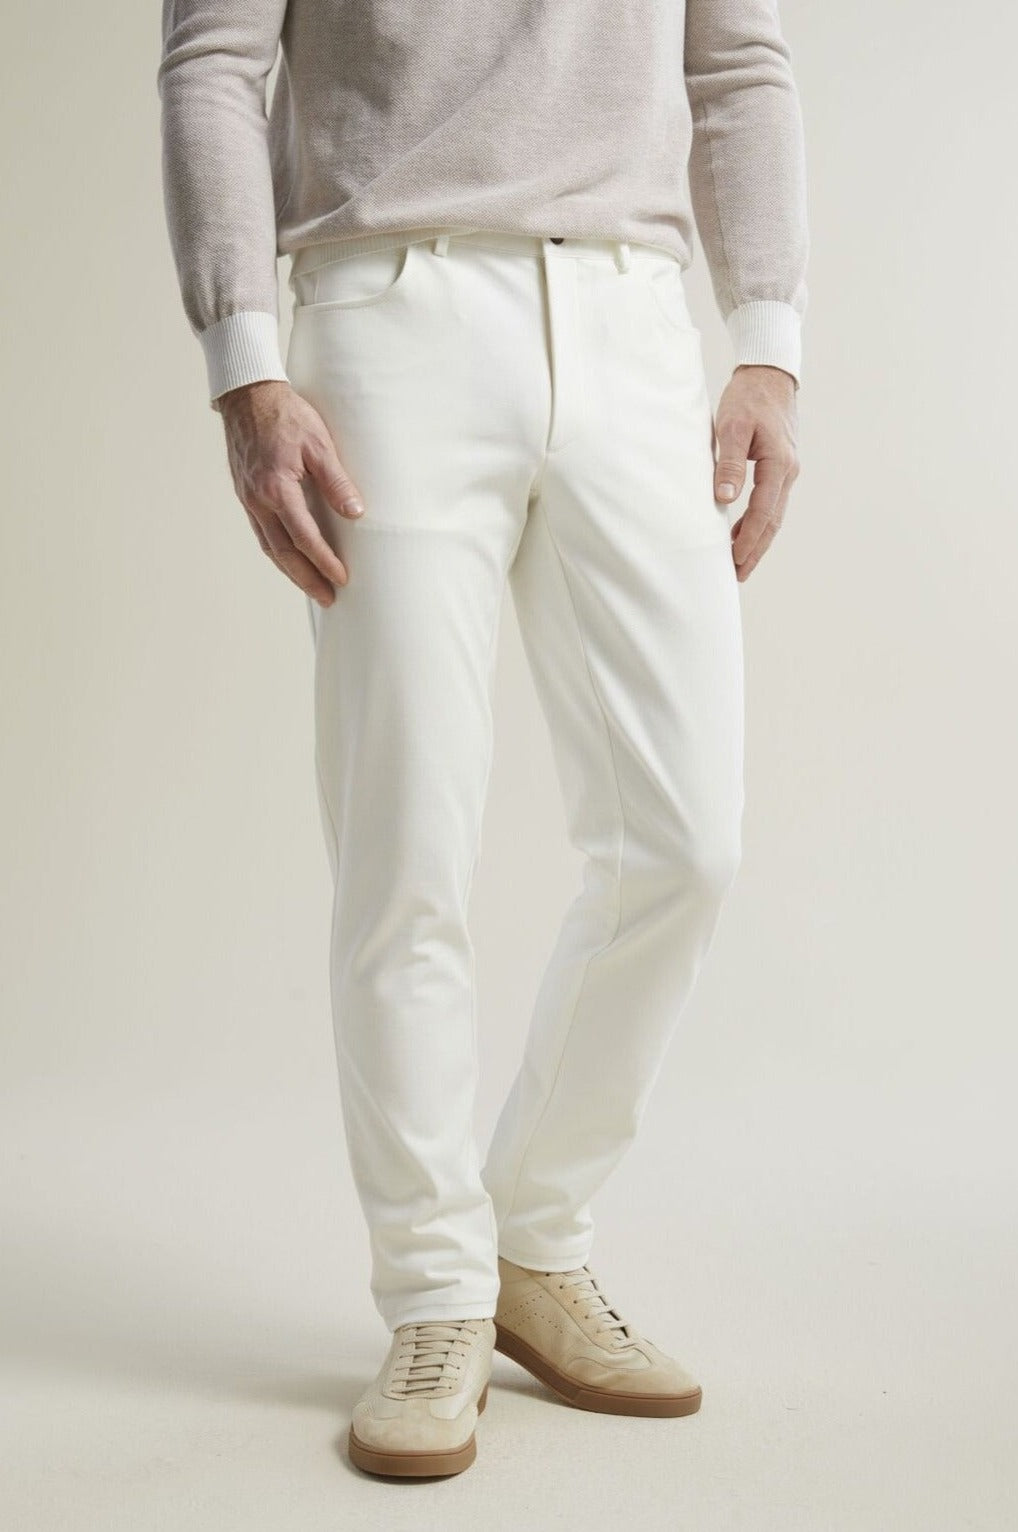 White Moleskin Knit 5-Pocket Pants Designed for work or play, a versatile 5-pocket pant stylish enough to wear with a tailored jacket, but as comfortable as your favorite jeans. Tailored in a modern fit of fabric woven in Italy, our White Moleskin Knit 5-Pocket Pant is durable, soft, and supremely comfortable.  This style features 5 pockets and light construction designed for ease of movement and wearability. 